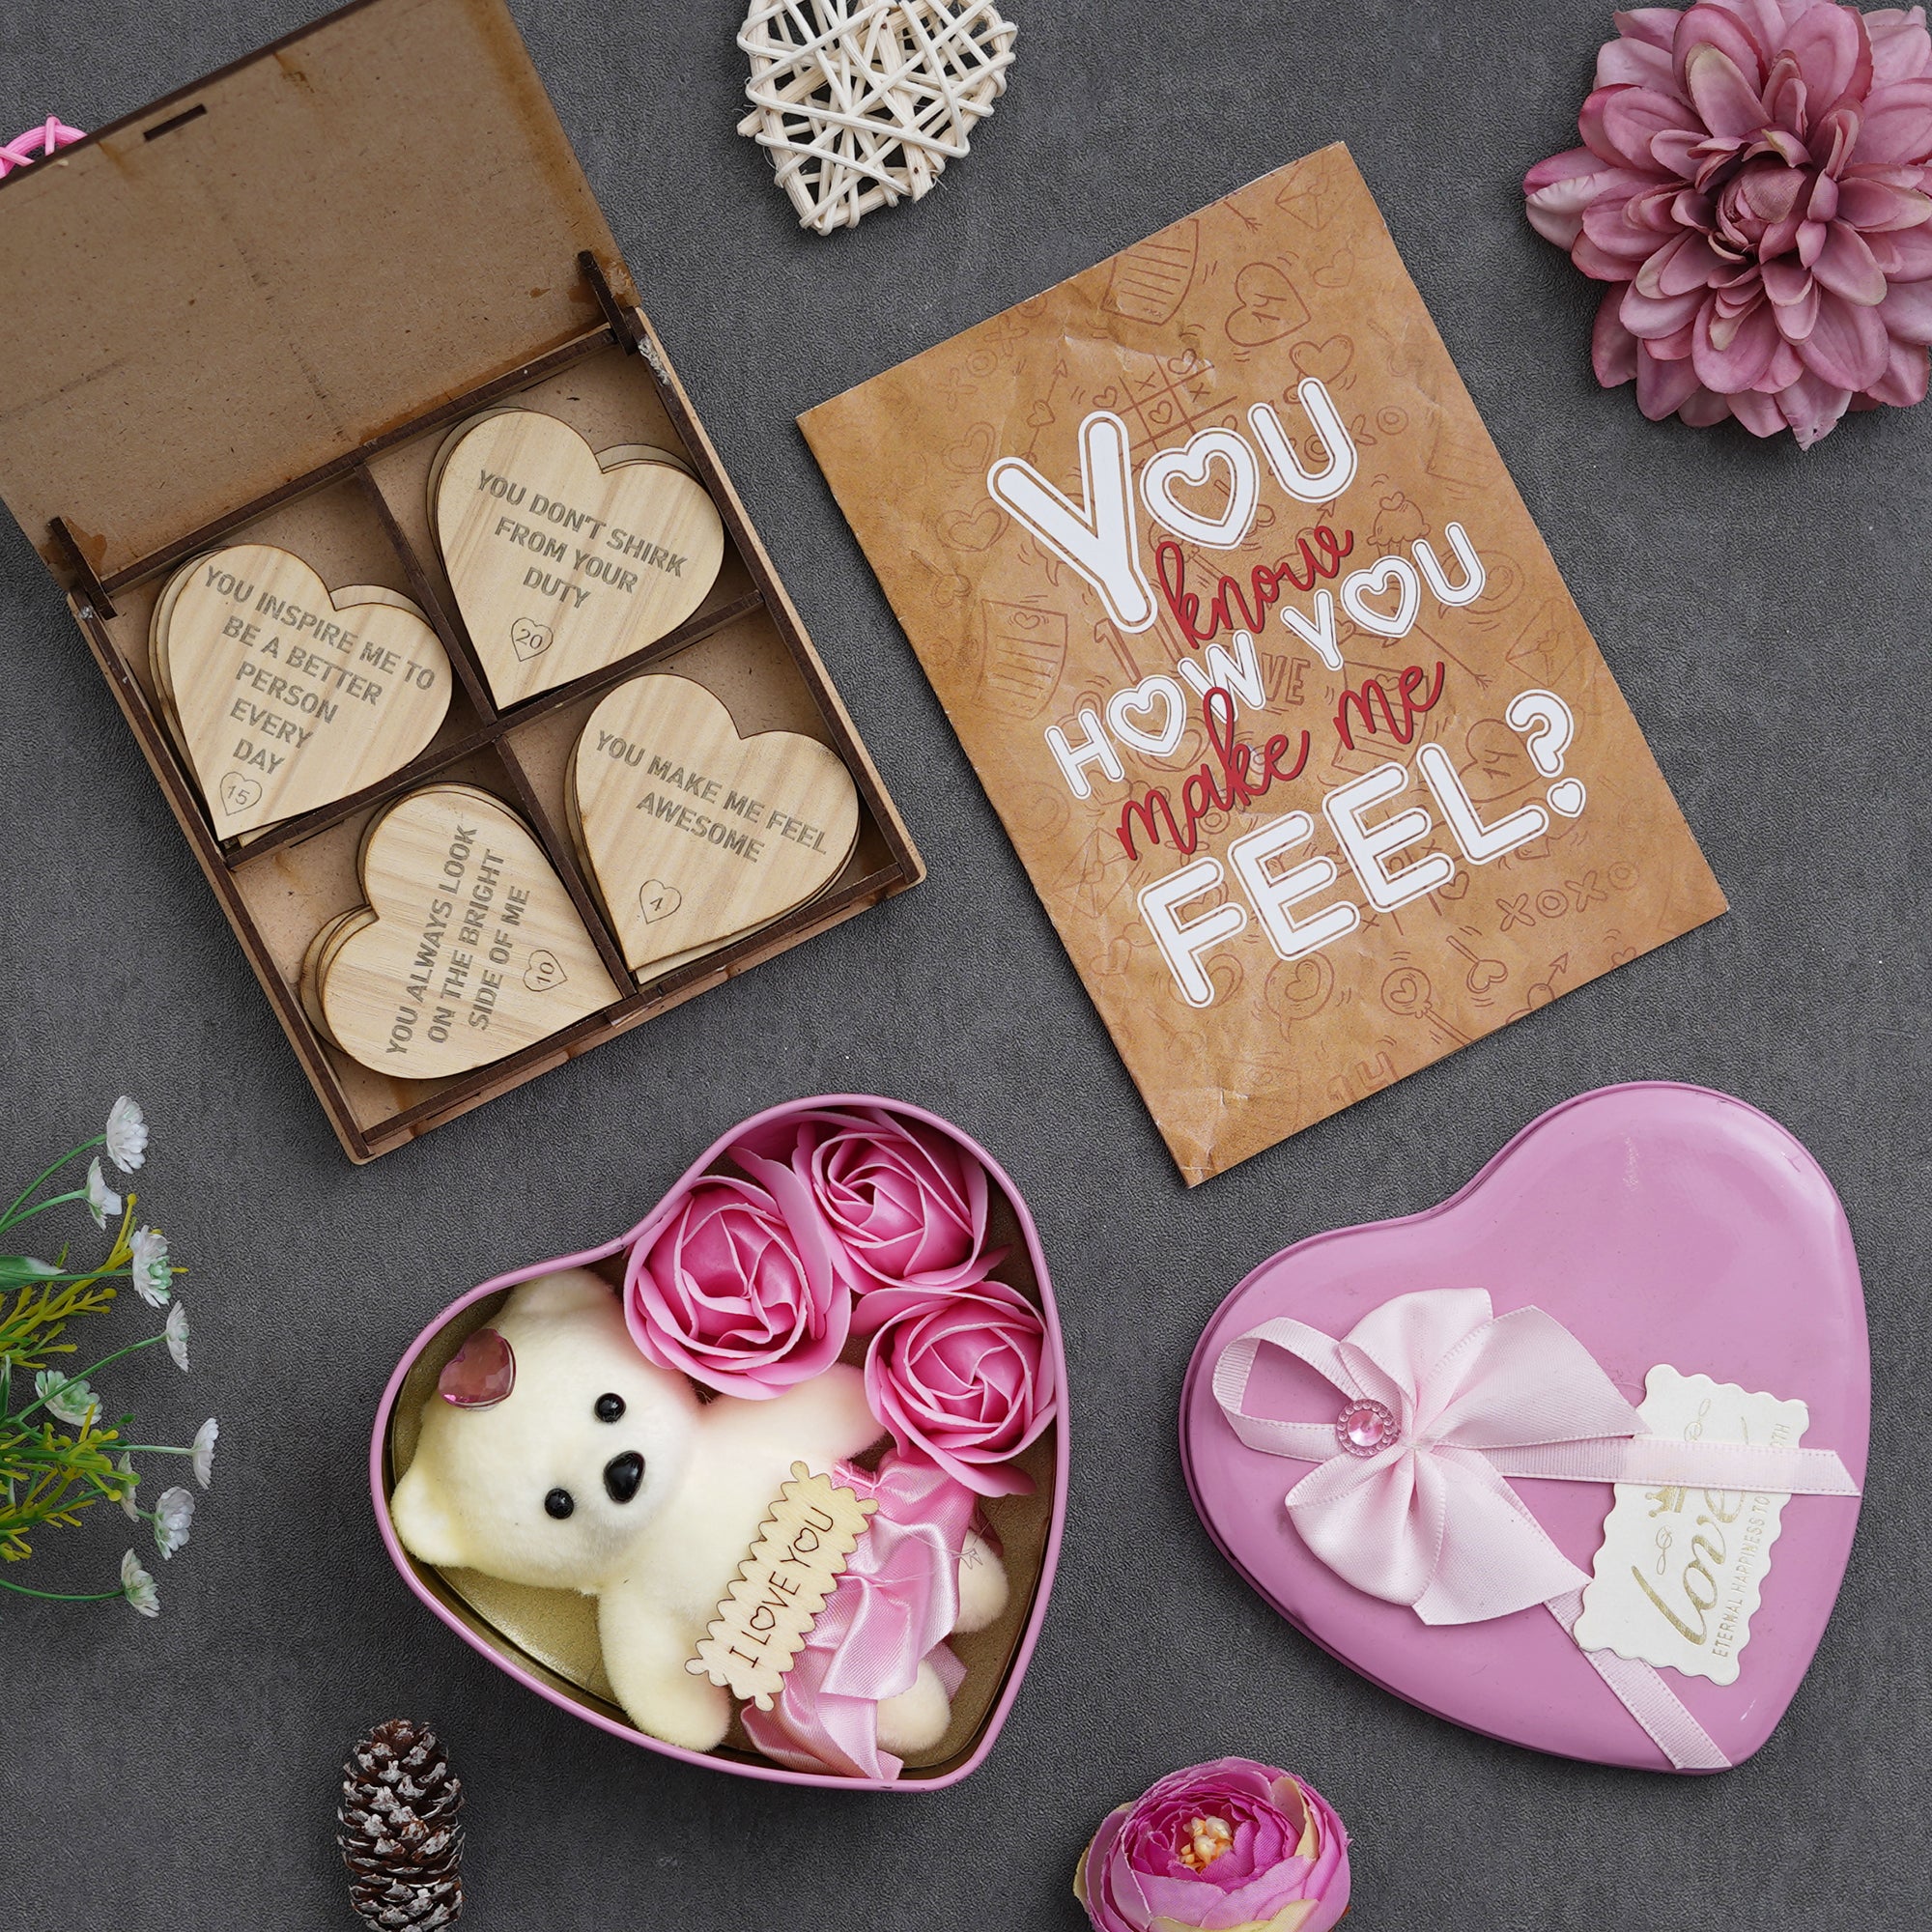 Valentine Combo of Card, "20 Reasons Why I Need You" Printed on Little Hearts Wooden Gift Set, Pink Heart Shaped Gift Box with Teddy and Roses